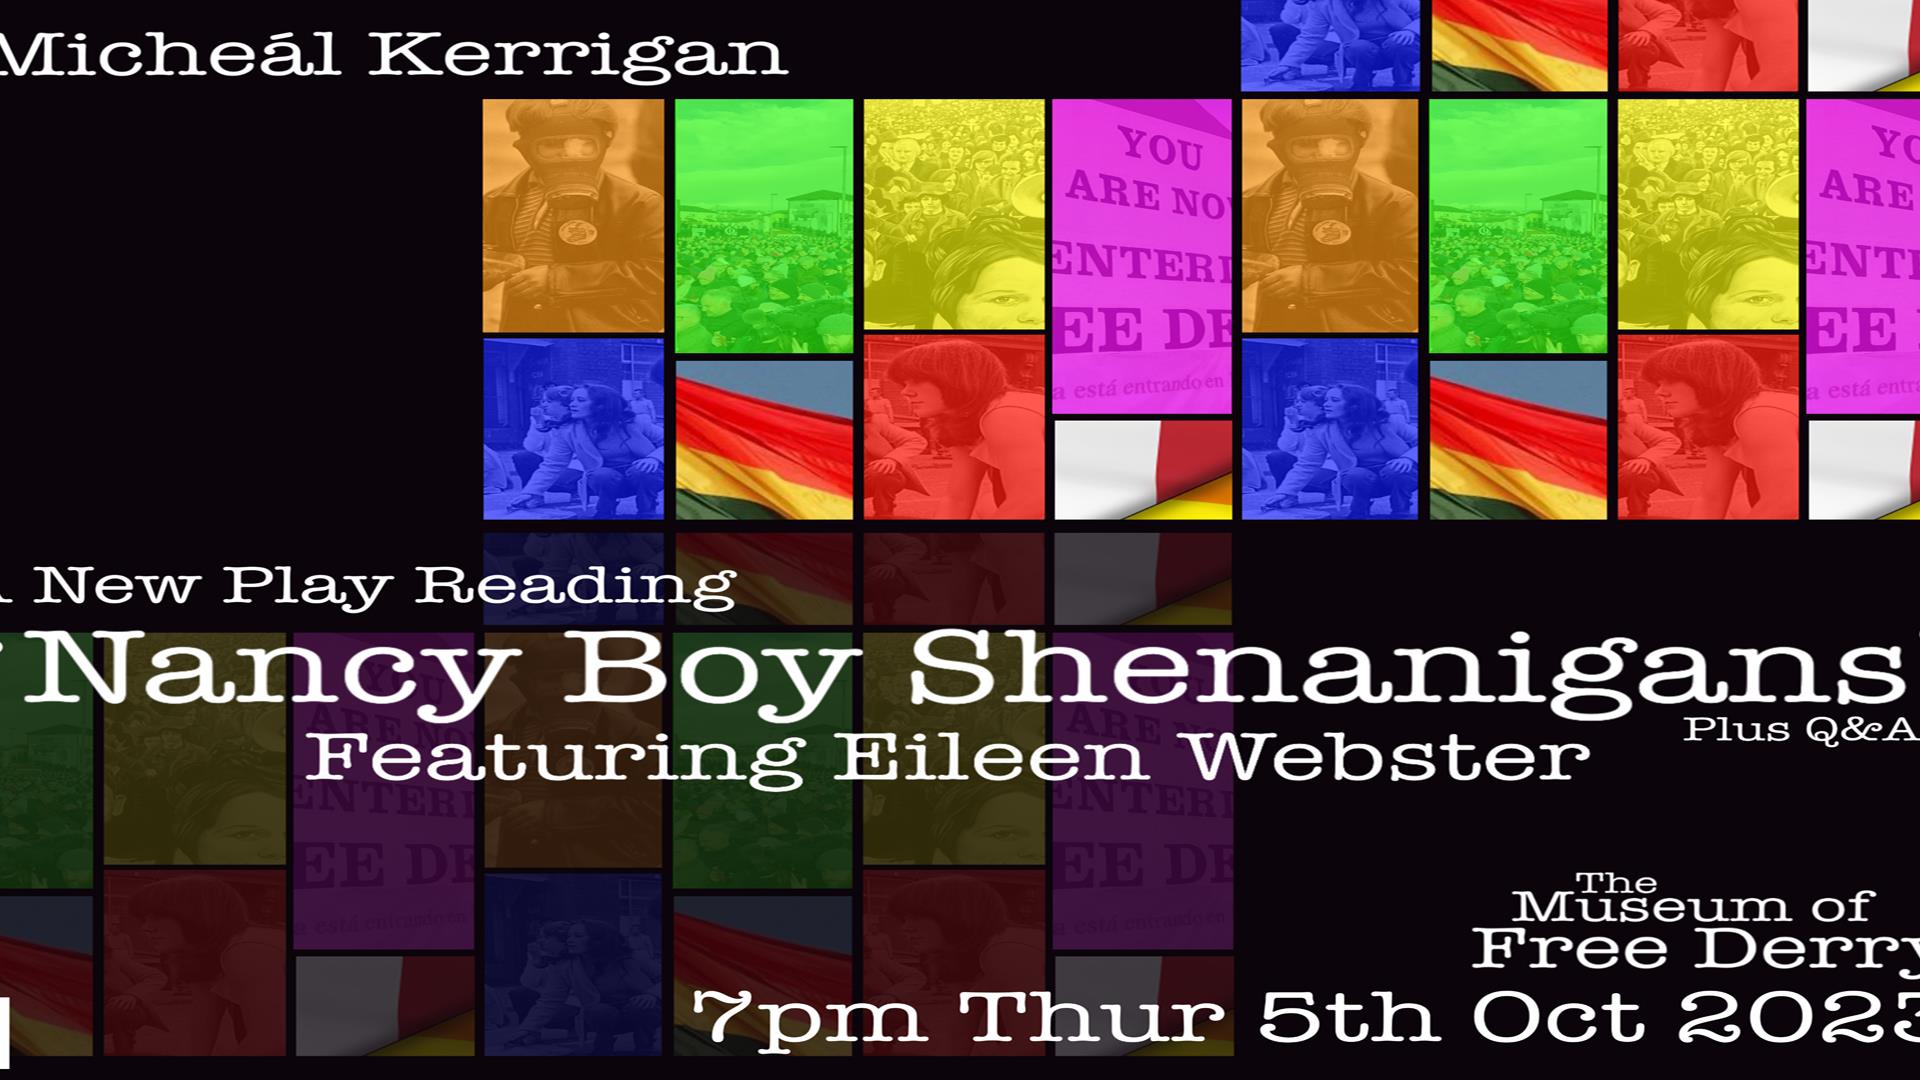 Acclaimed playwright Micheál Kerrigan will read extracts from his new autobiographical work Nancy Boy Shenanigans, reflecting on the development of LG